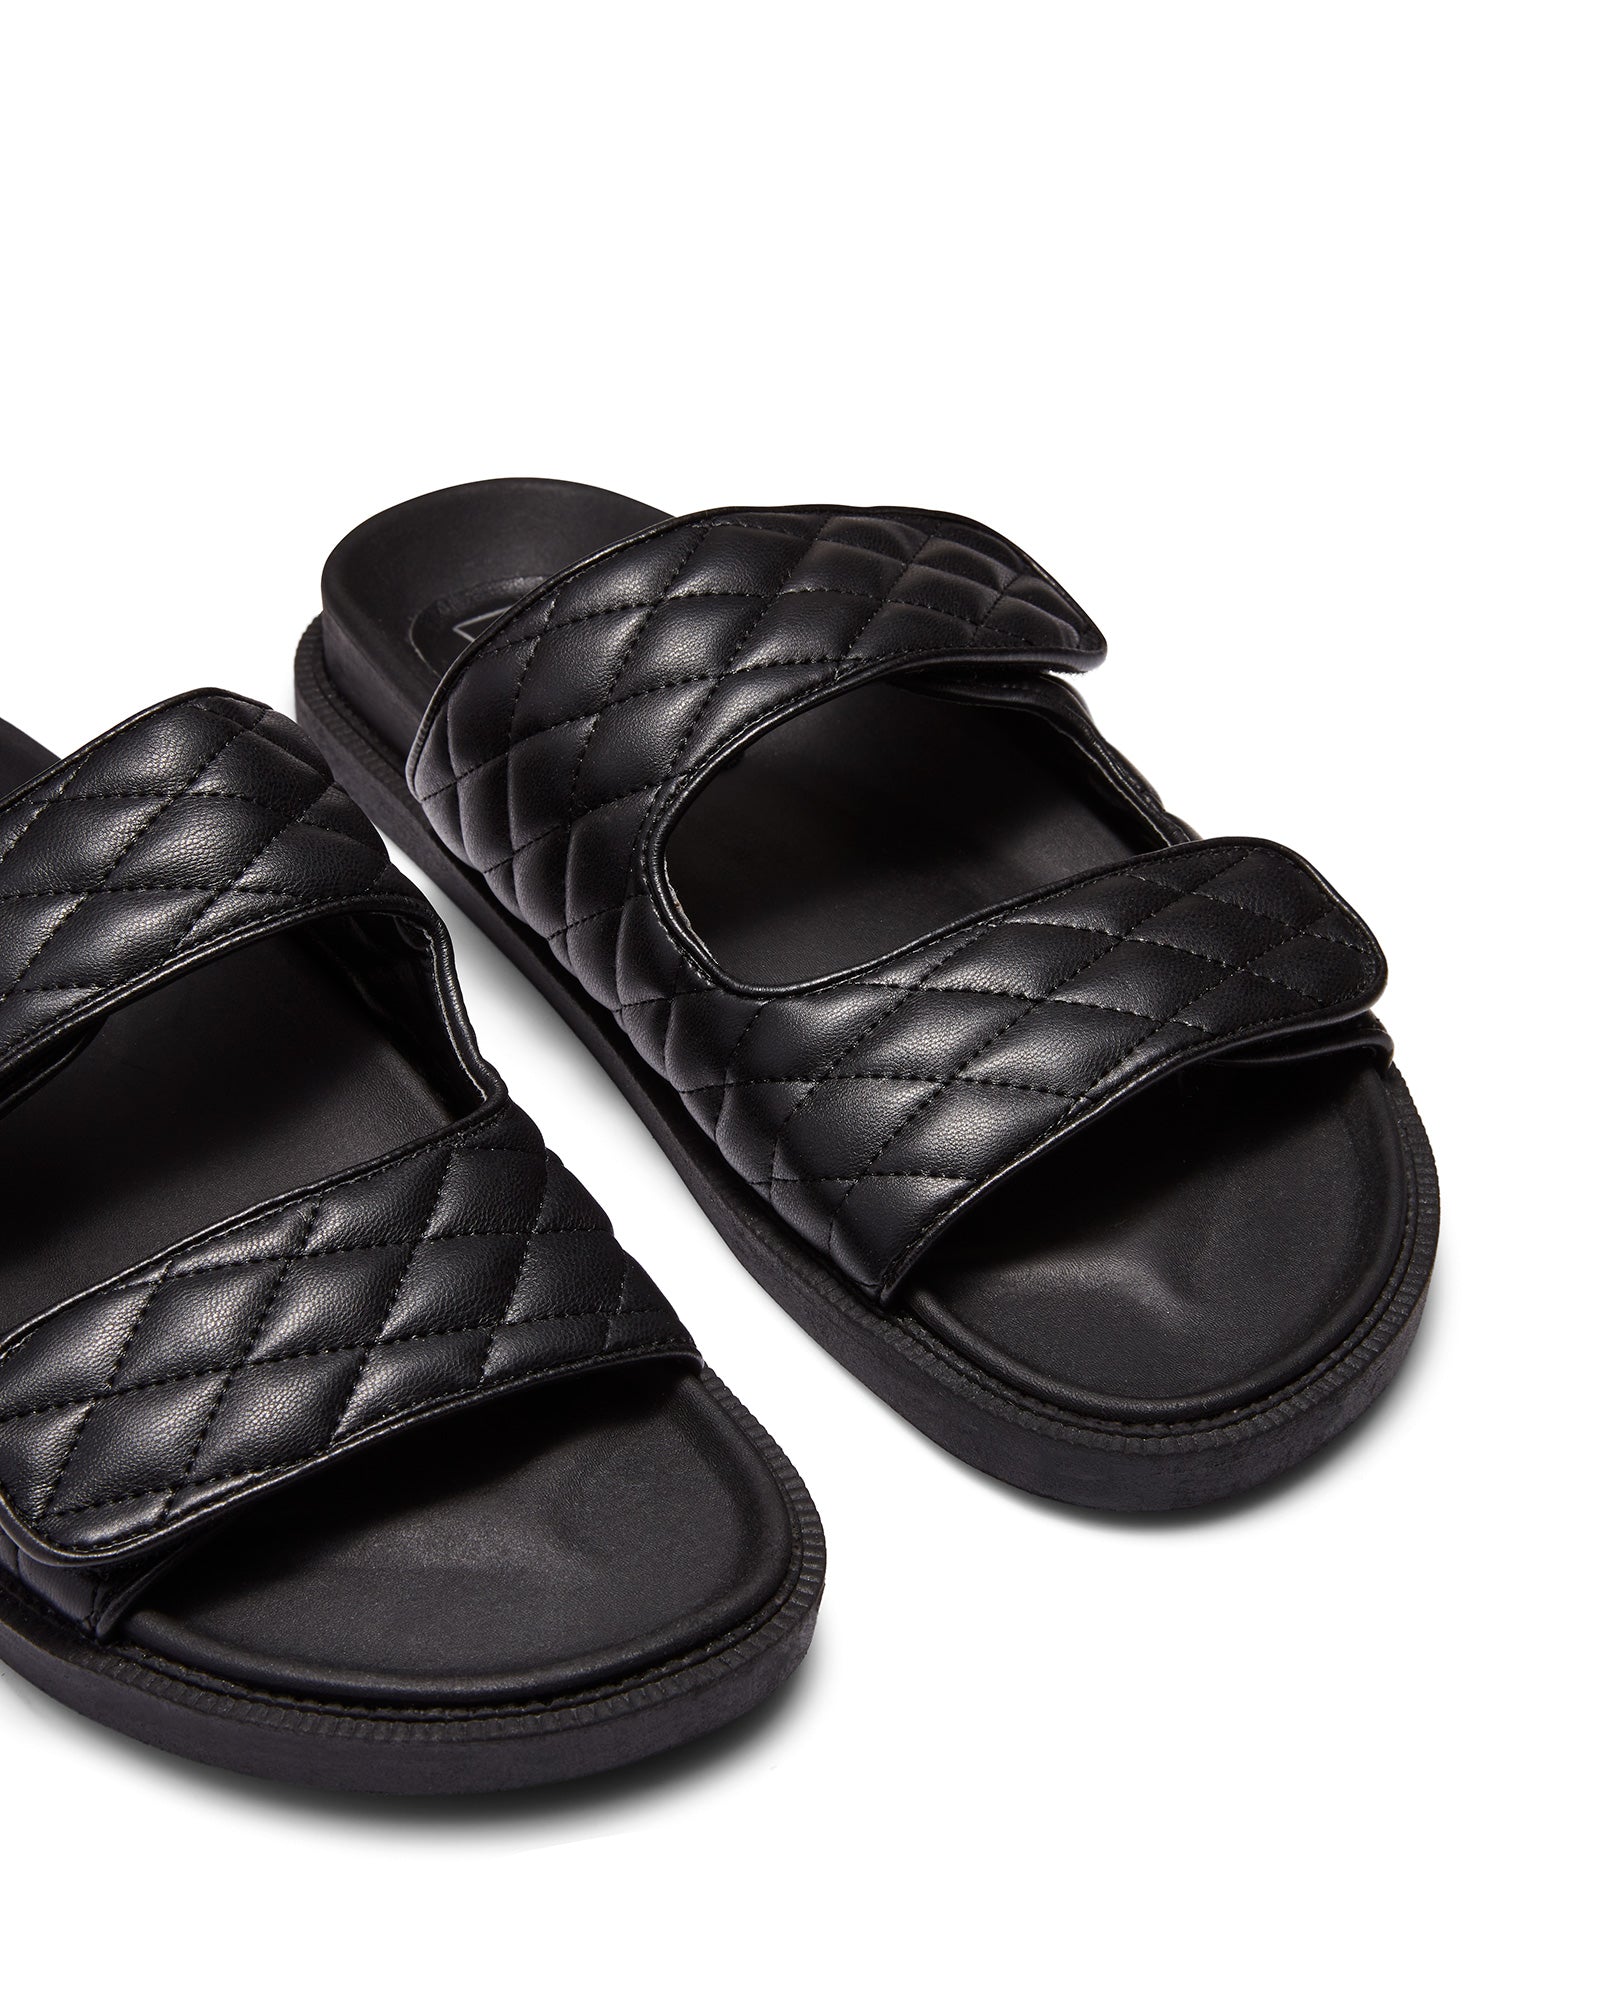 Therapy Shoes Linda Black | Women's Slides | Sandals | Flatform | Quilted